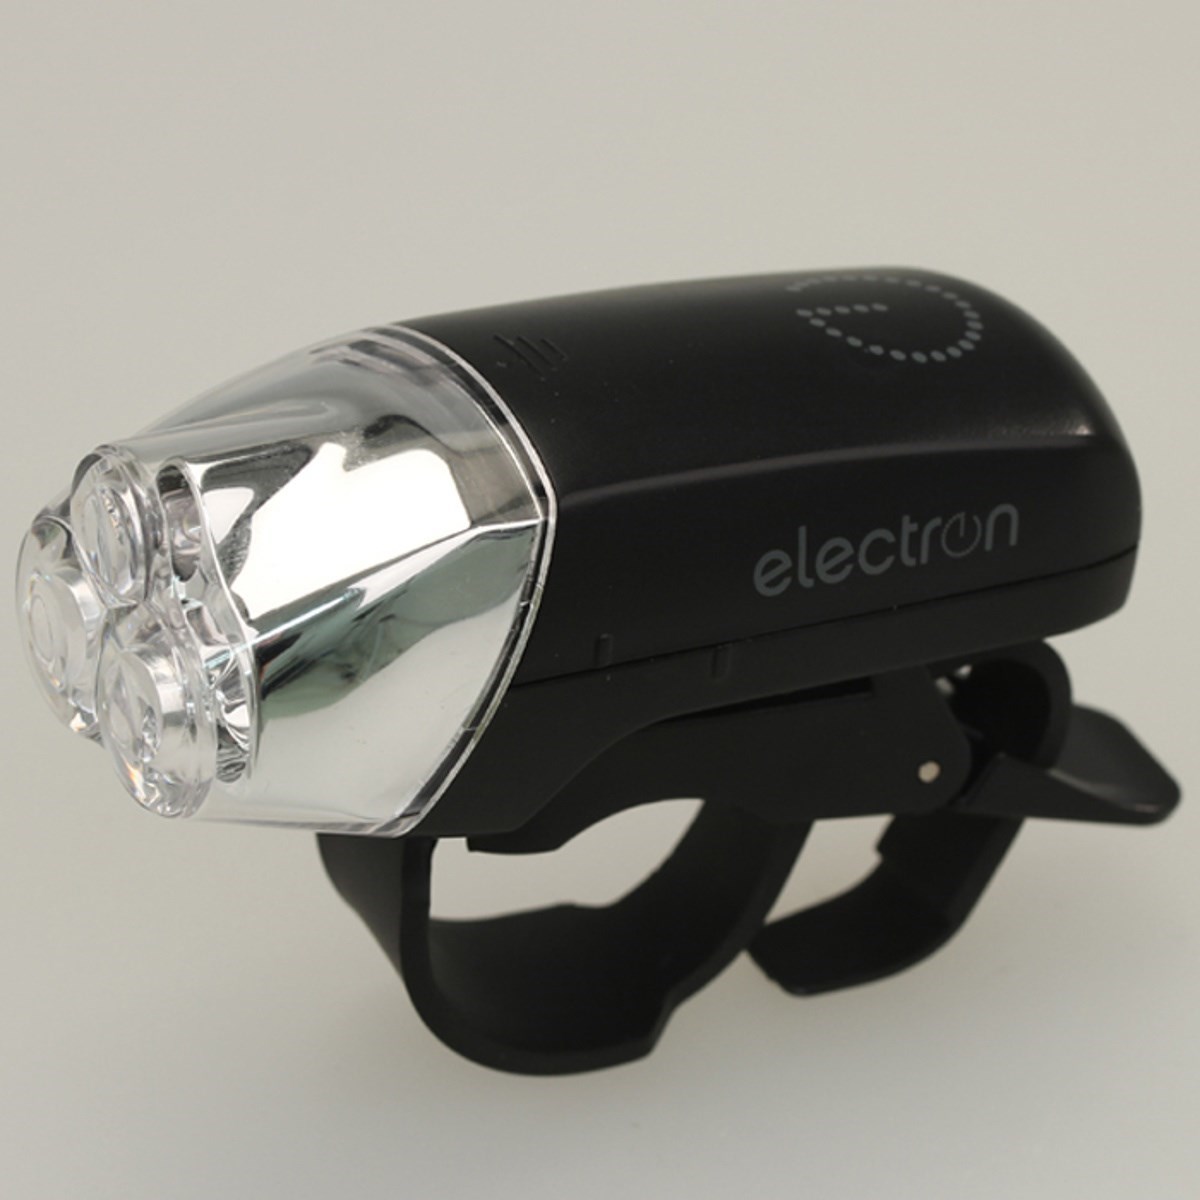 Electron Micro 3 Front Safety Light product image